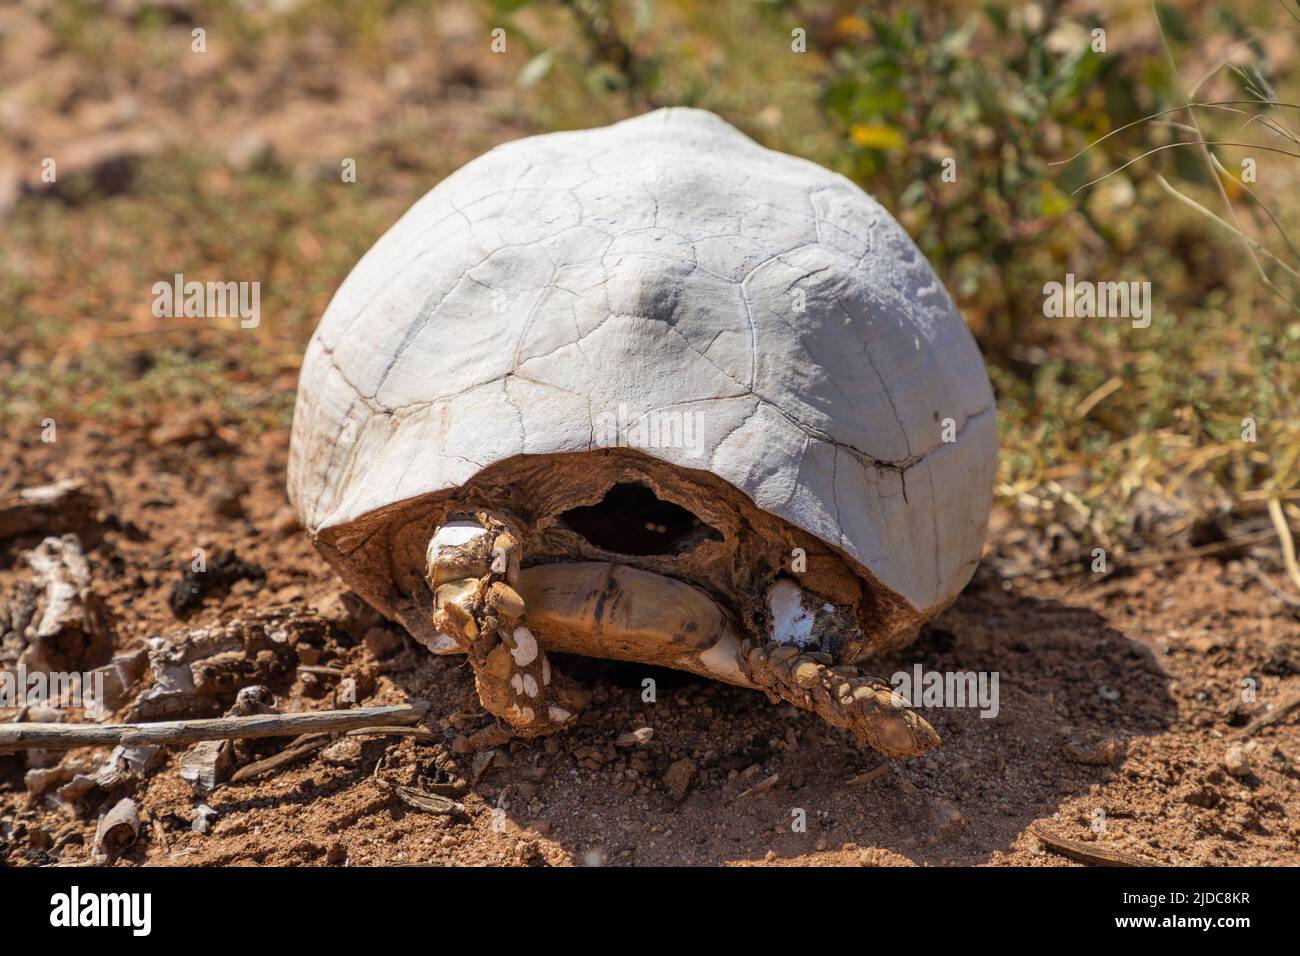 Selective focus on the shell and legs of a dead tortoise in a desert location.  The shell has discoloured and is white. Stock Photo